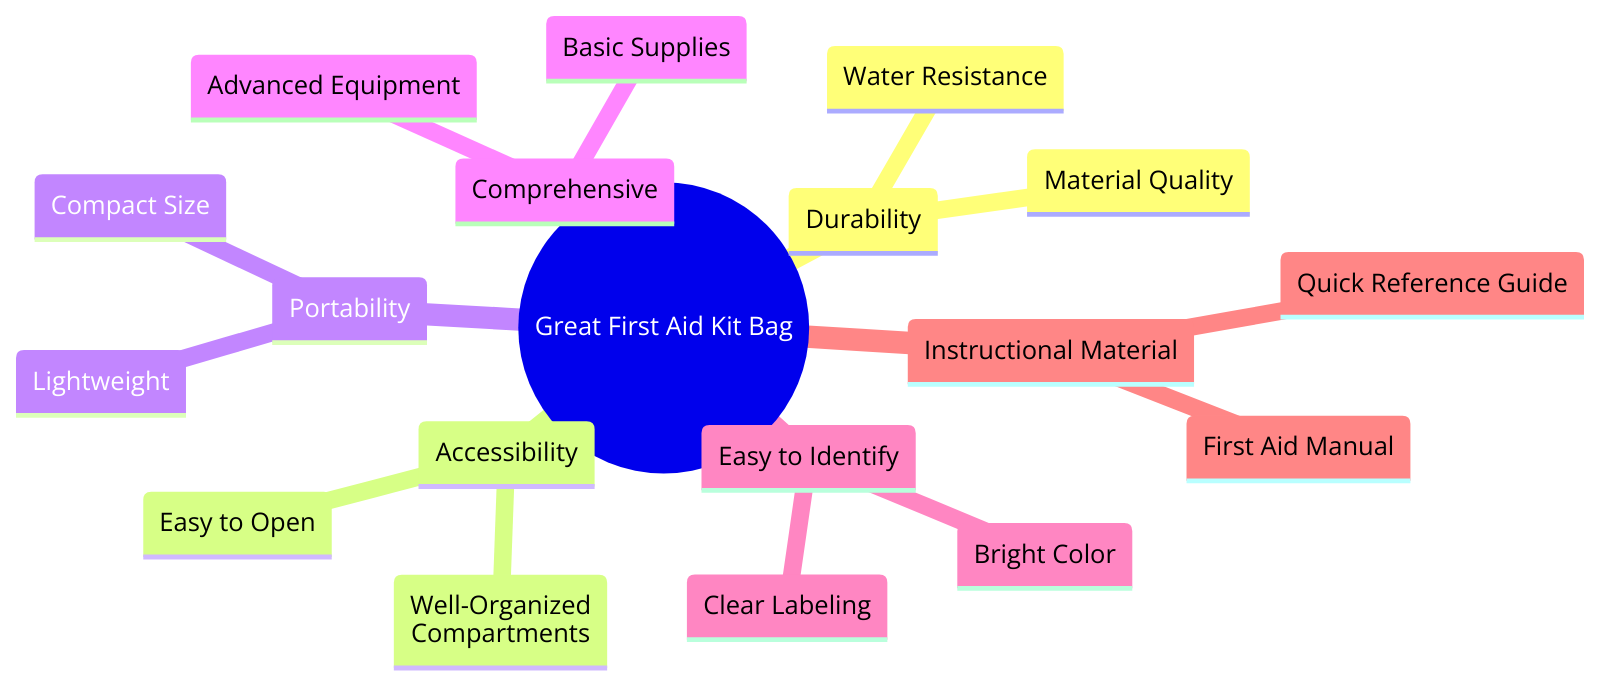 the most important characteristics of a protective first aid kit bag to be a great first aid kit bag